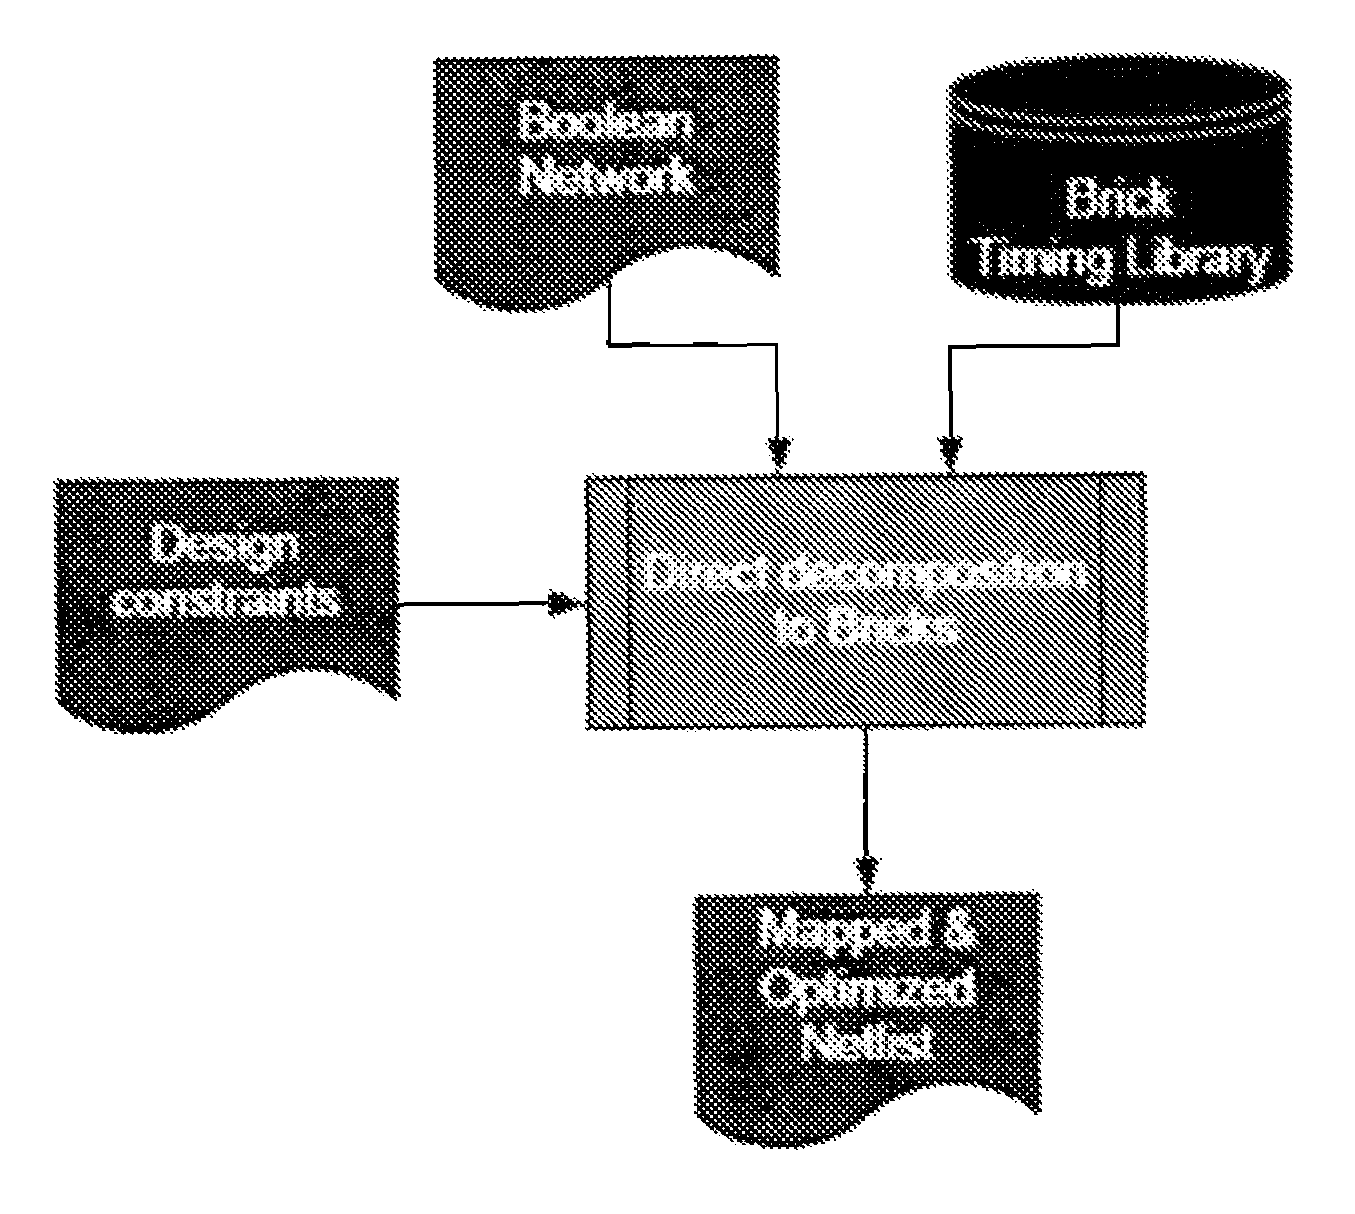 Method for mapping a Boolean logic network to a limited set of application-domain specific logic cells